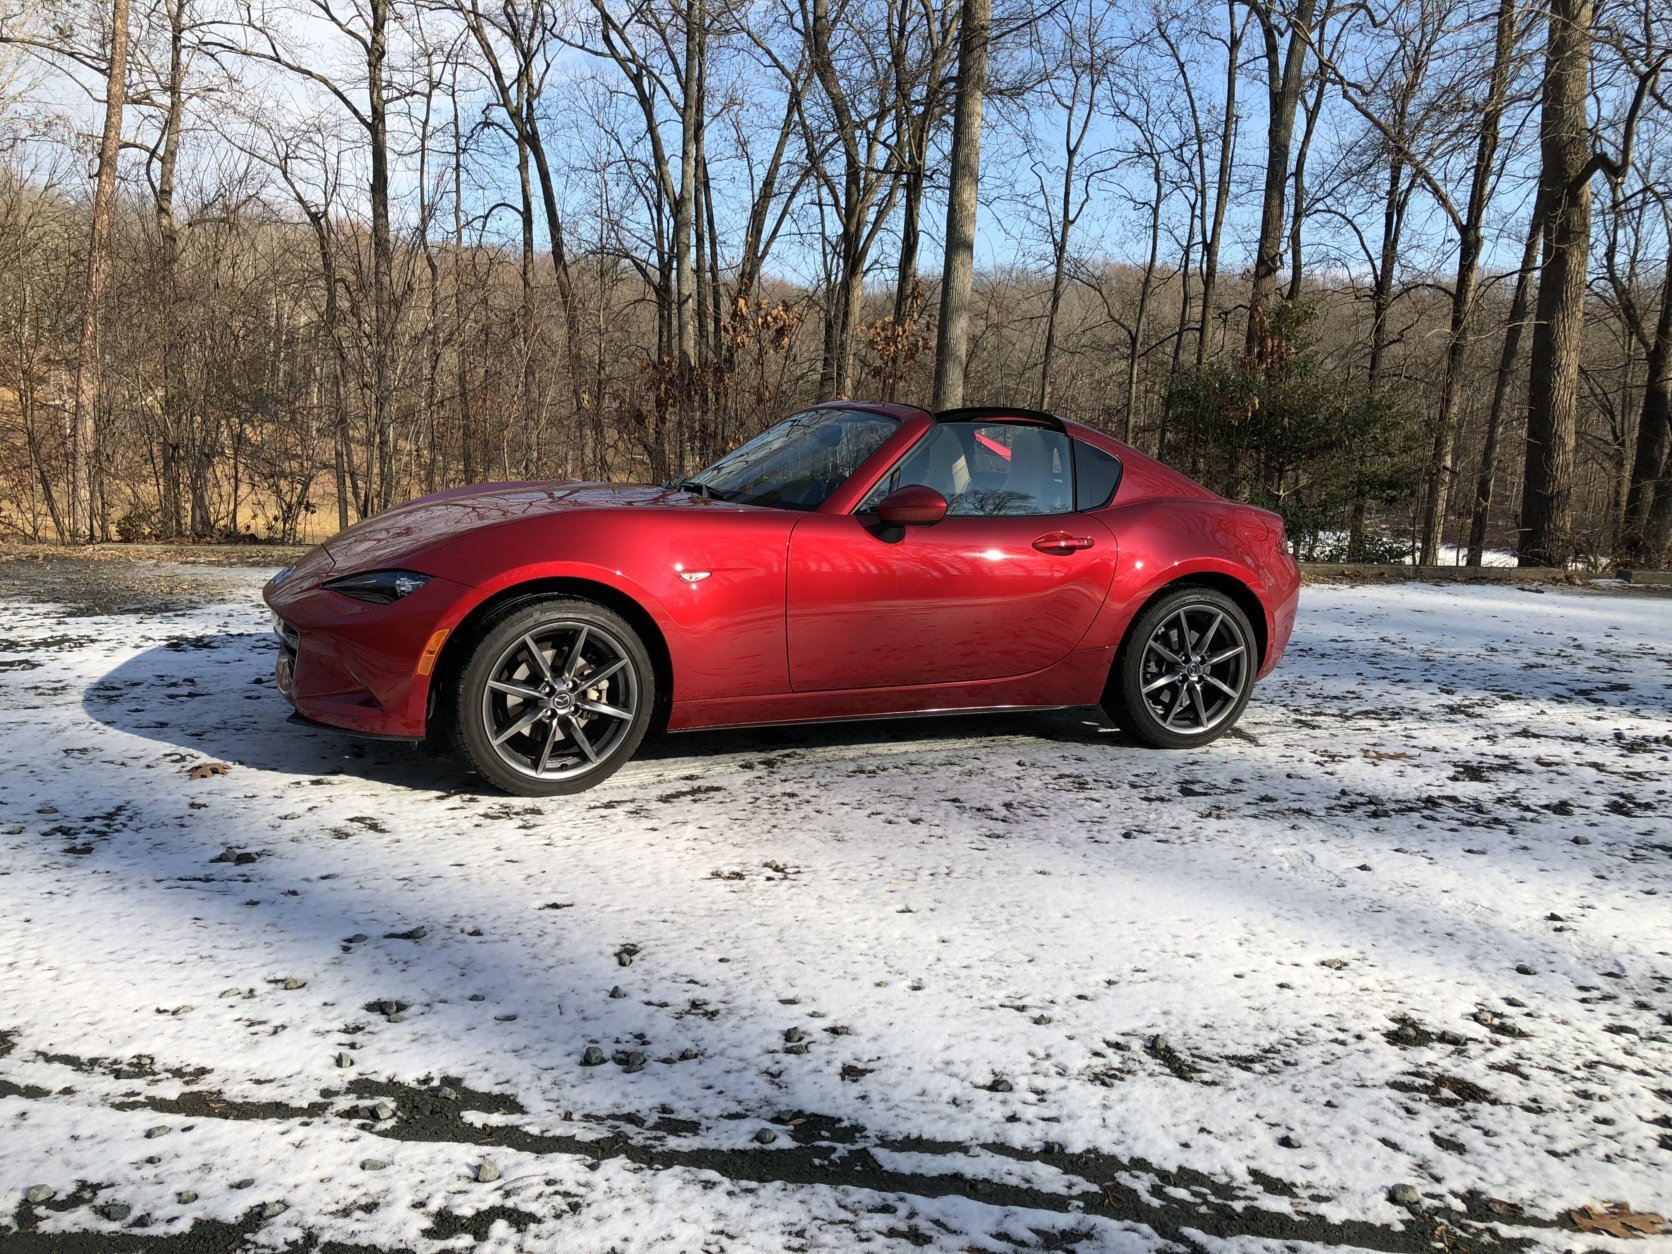 Mike Parris drove the latest version of the new MX-5 called the RF, which loses the easy, manual and fabric top, replacing it with an electric folding roof. (WTOP/Mike Parris)